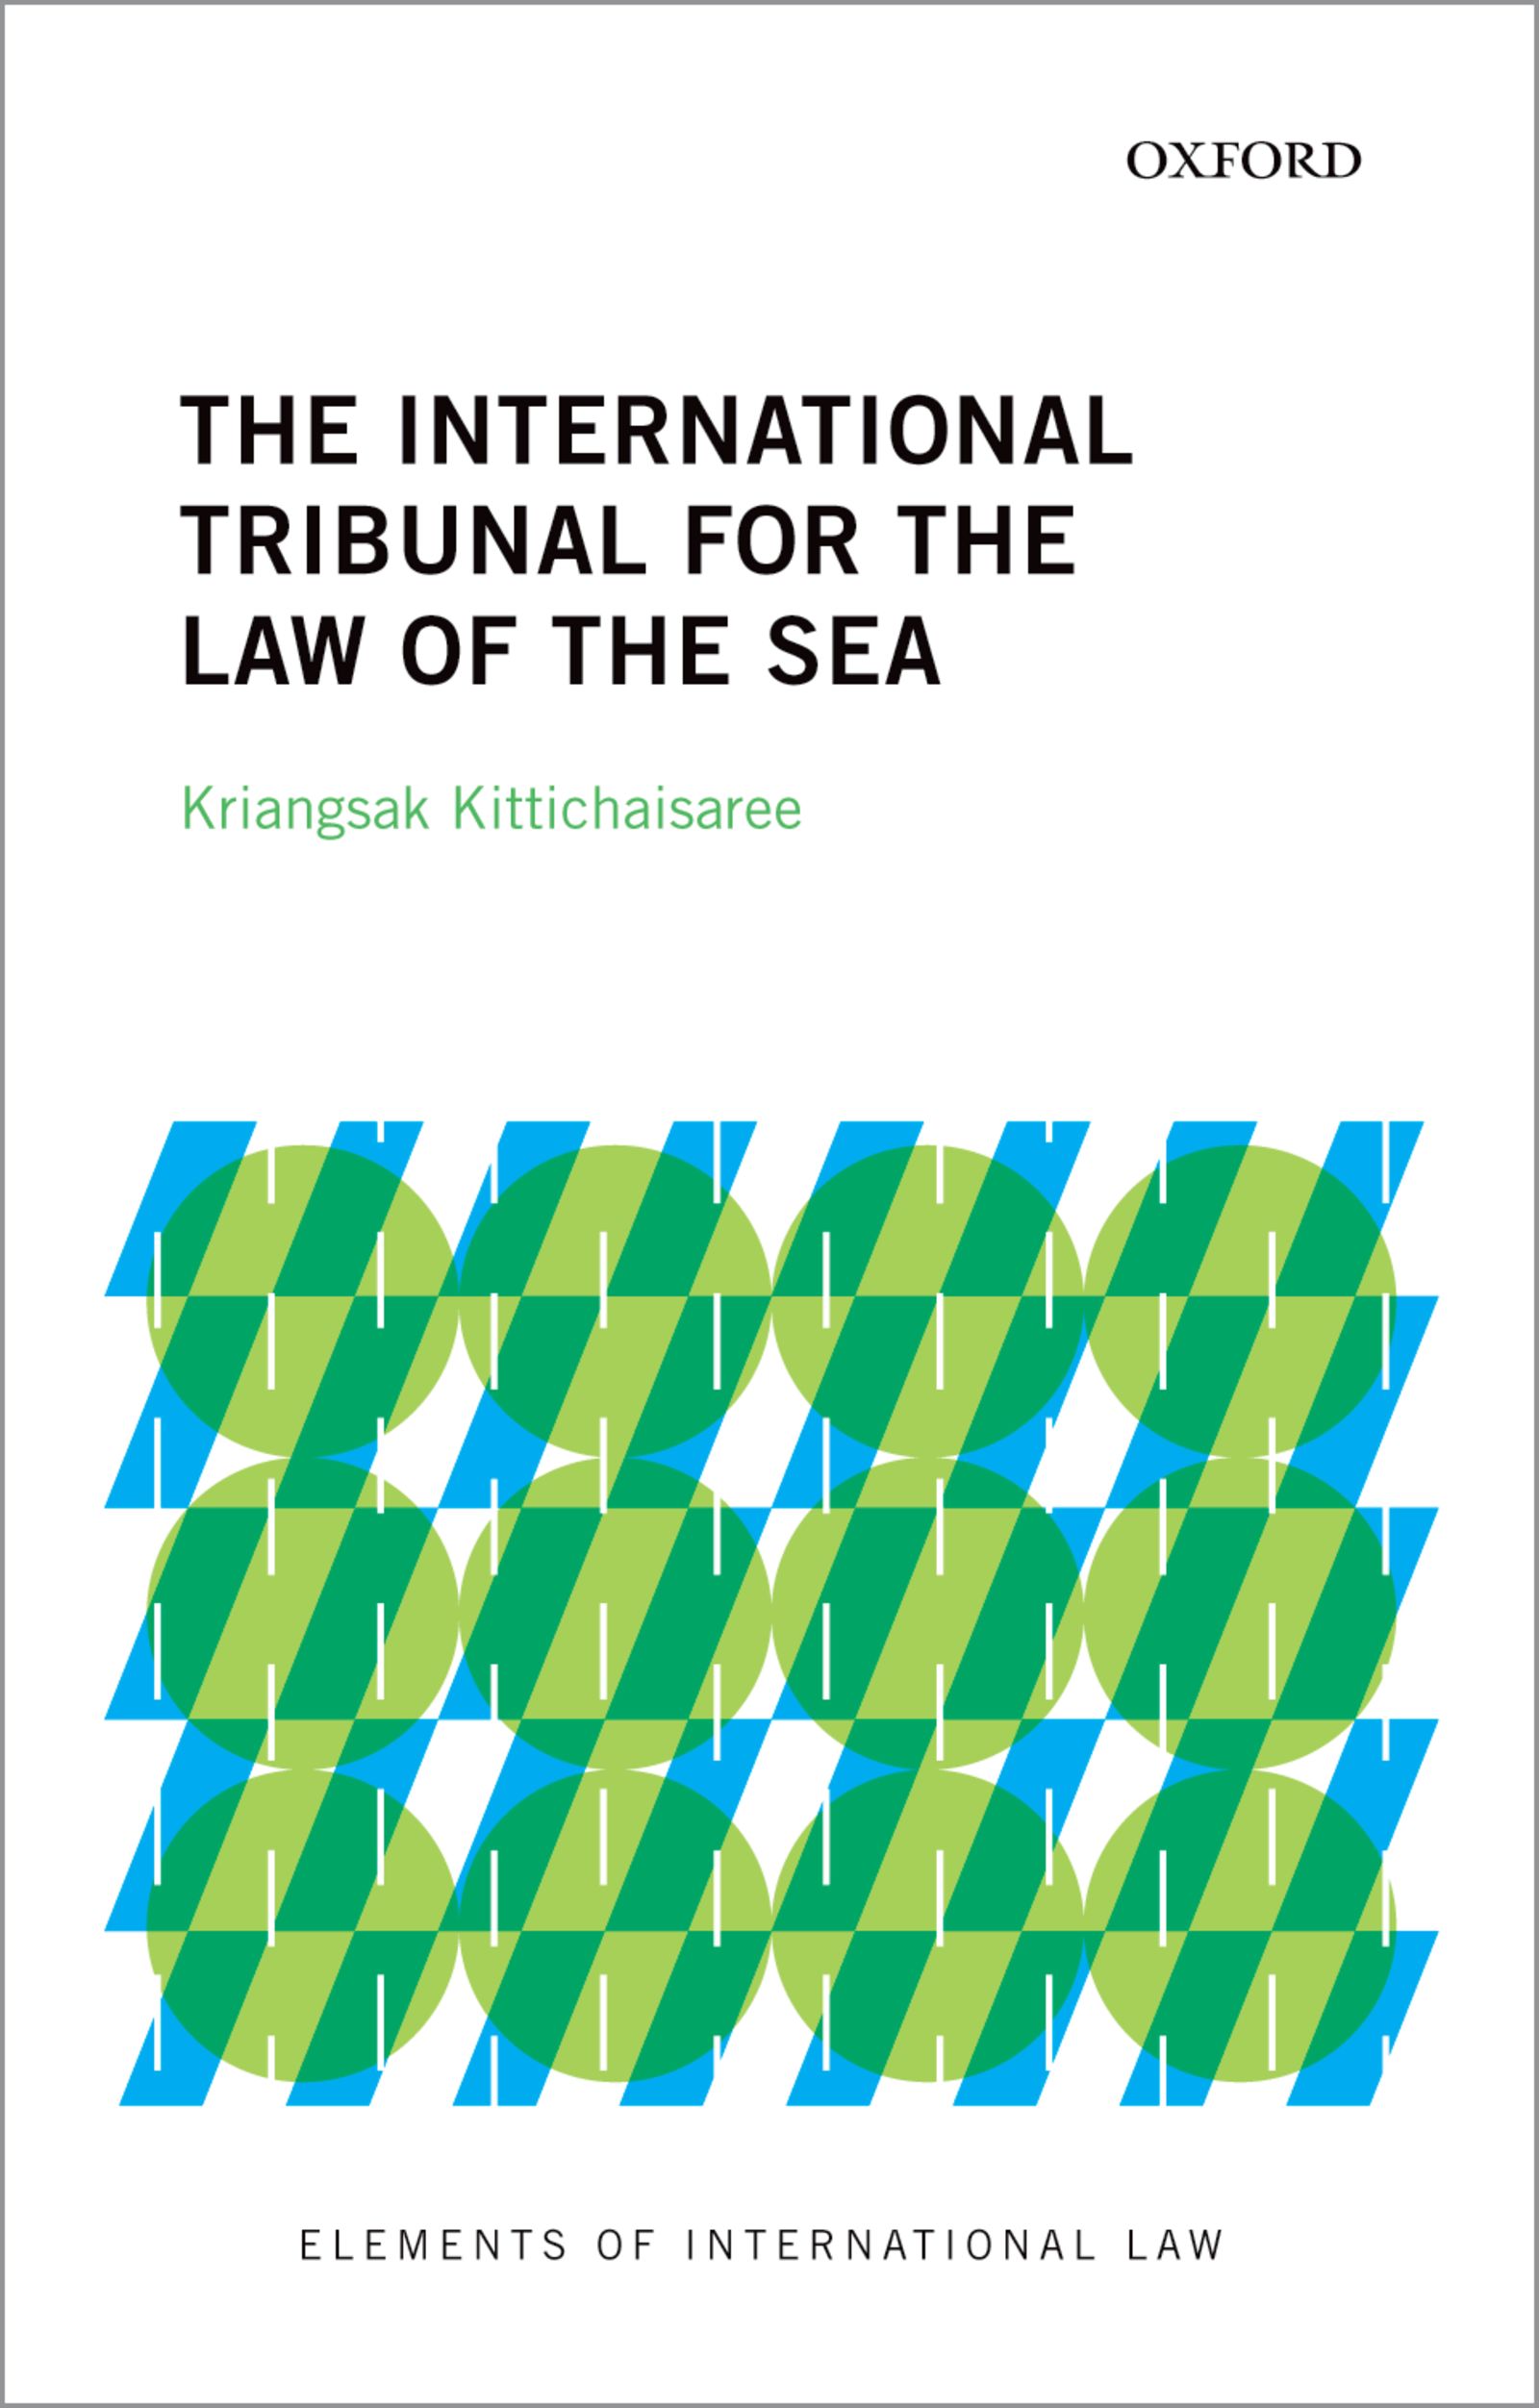 The International Tribunal for the Law of the Sea - 15-24.99